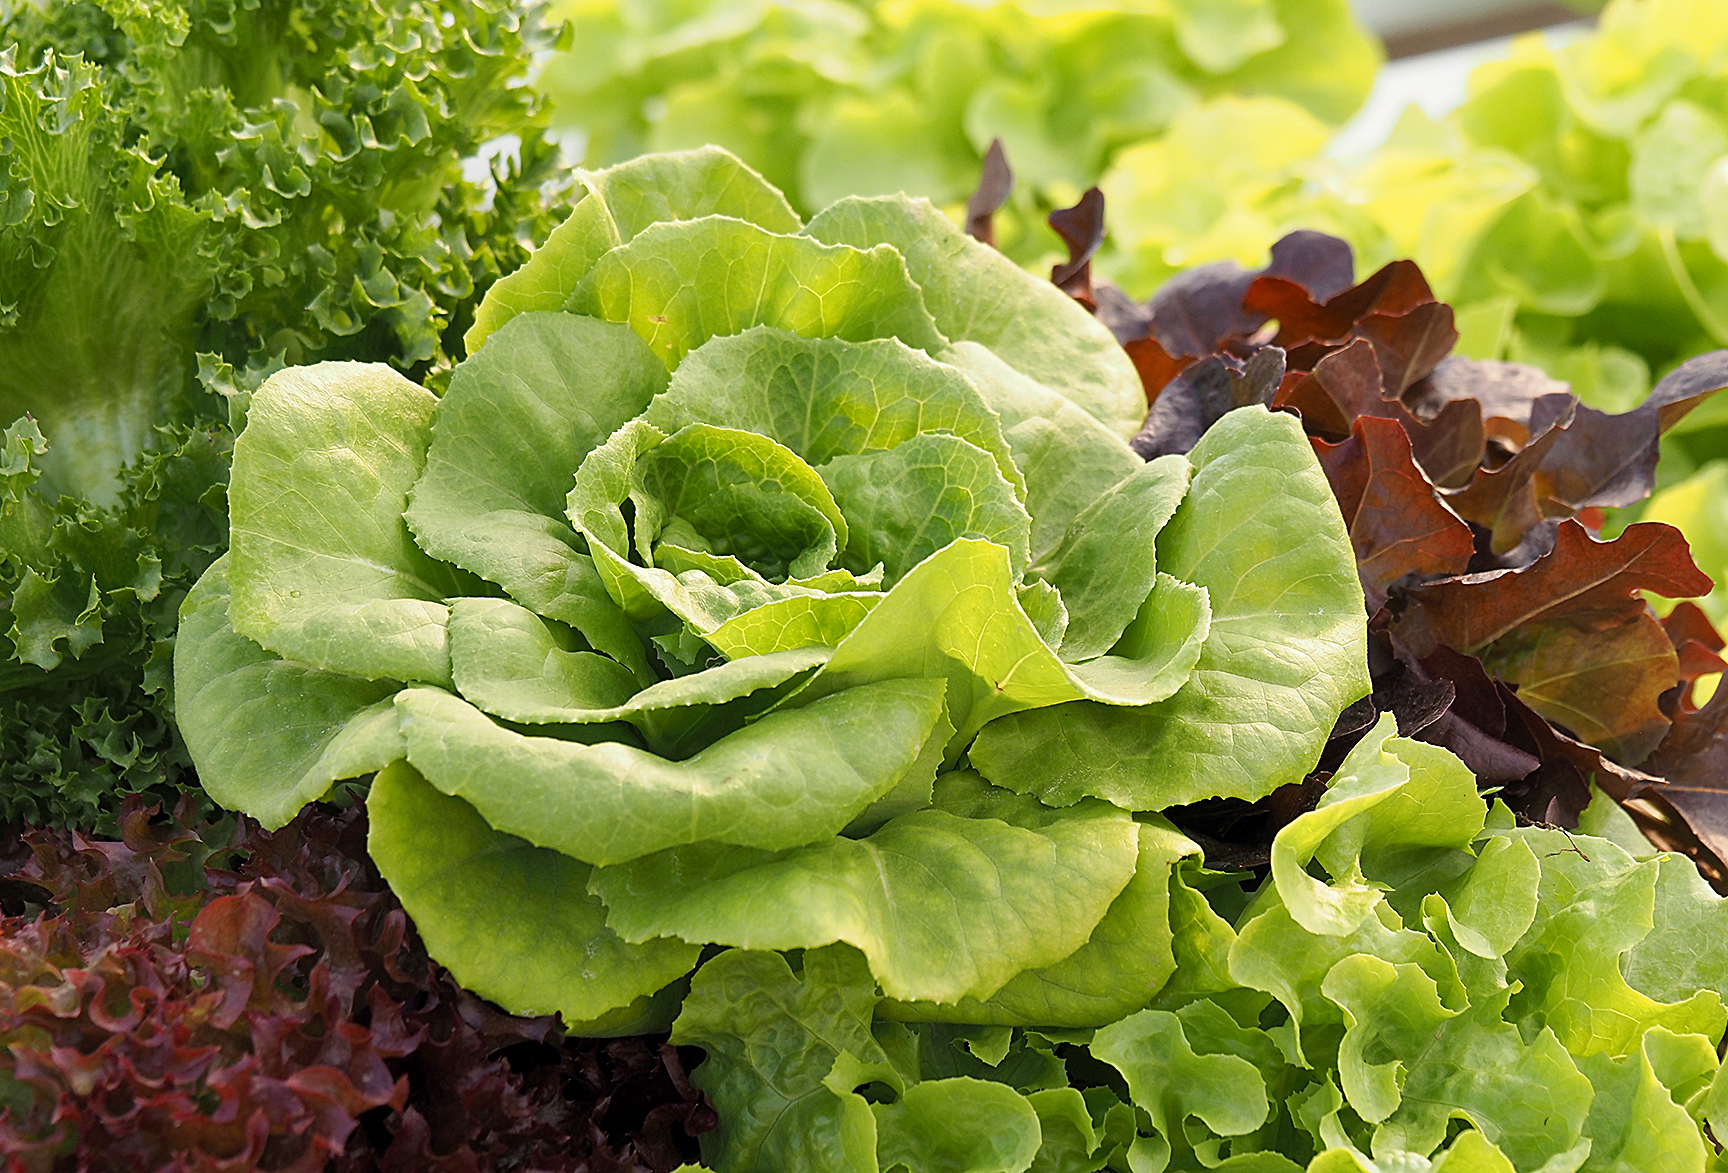 A variety of salad greens, such as green oak, rat oak, butterhead and green coral are placed in a vegetable basket.